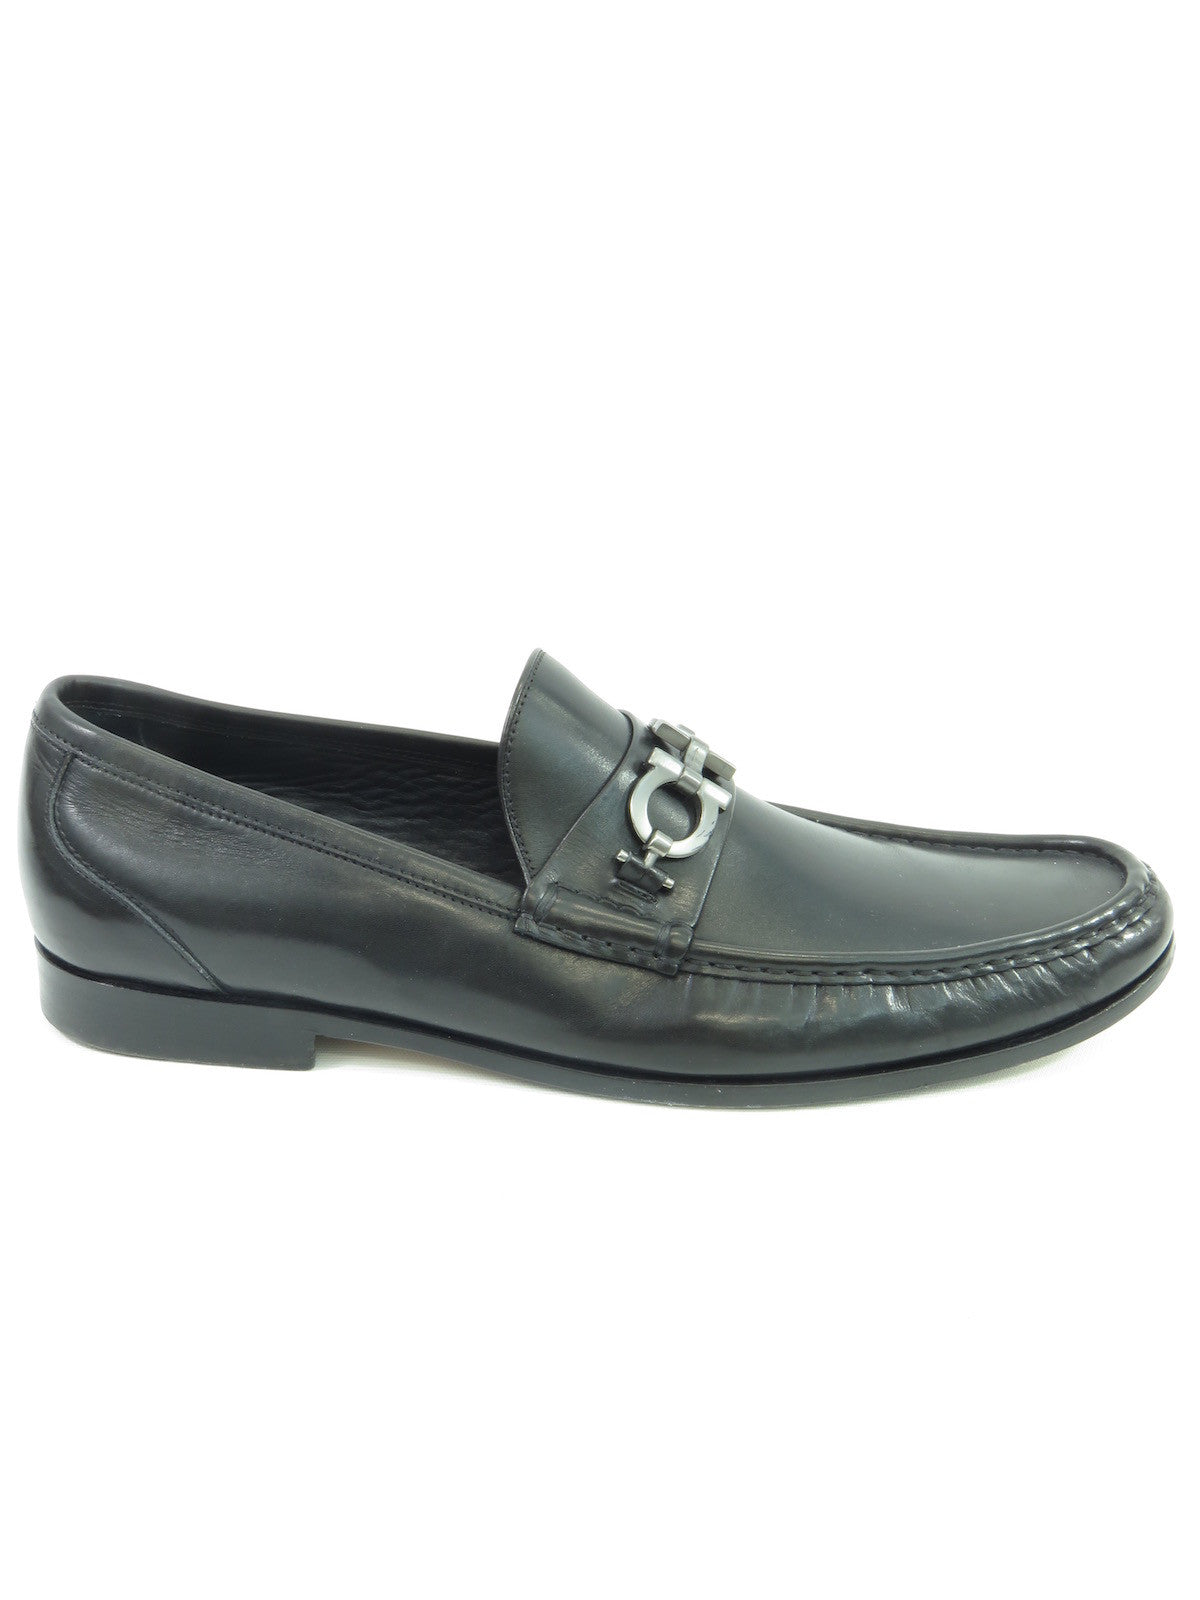 mens black dress shoes with silver buckle